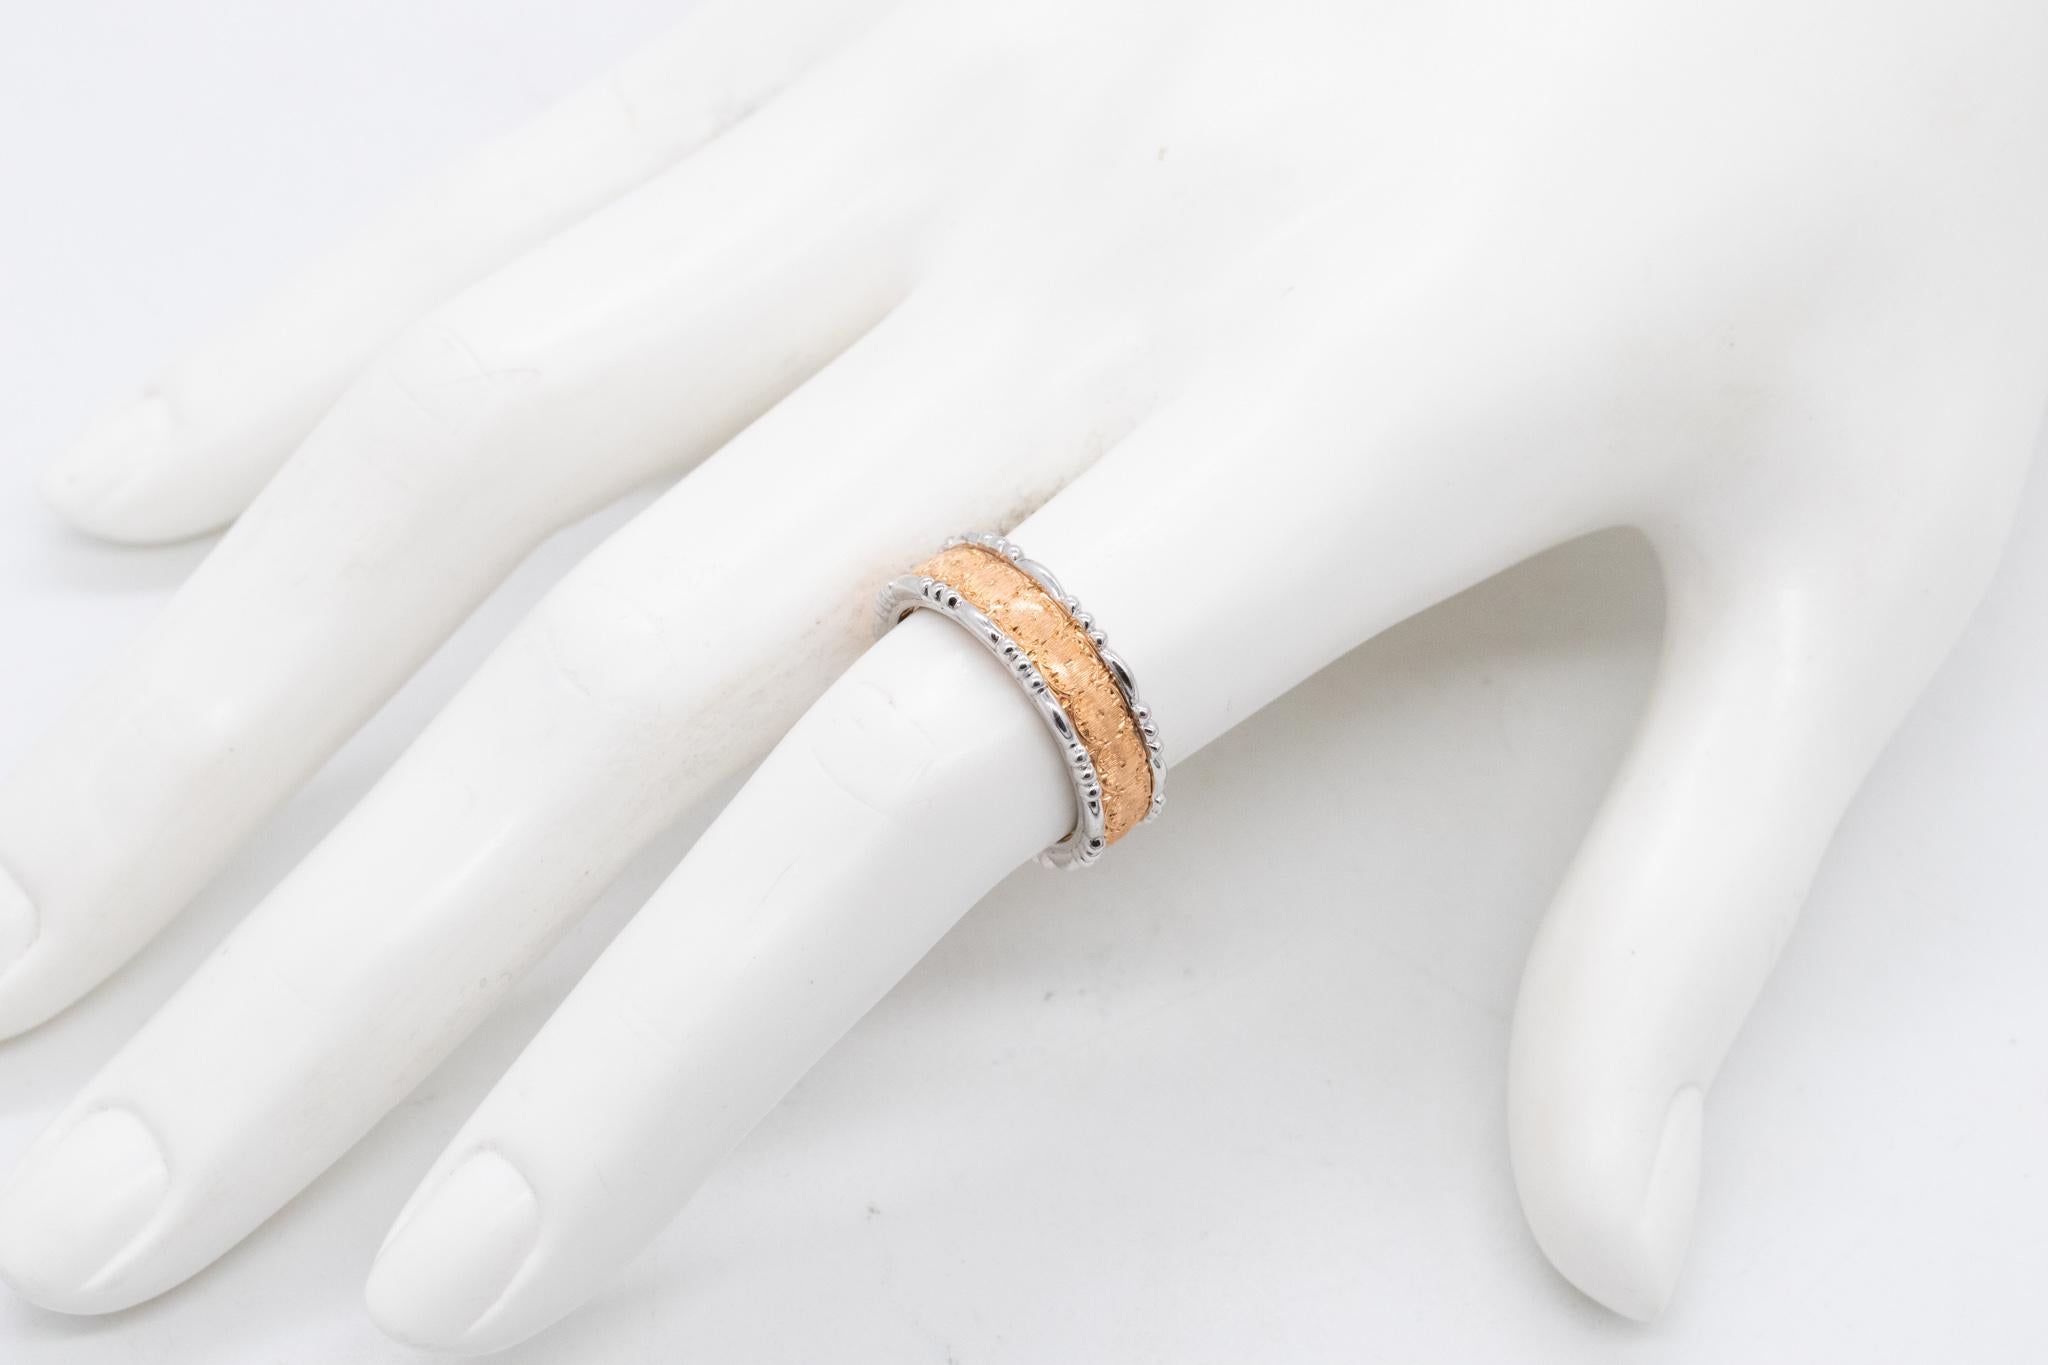 A limited edition ring designed by Buccellati.

Beautiful piece from a limited edition from the house of Buccellati. Crafted in Milano, Italy, with intricate details in solid 18 karats of textured brushed rose gold with both sides in white gold. The